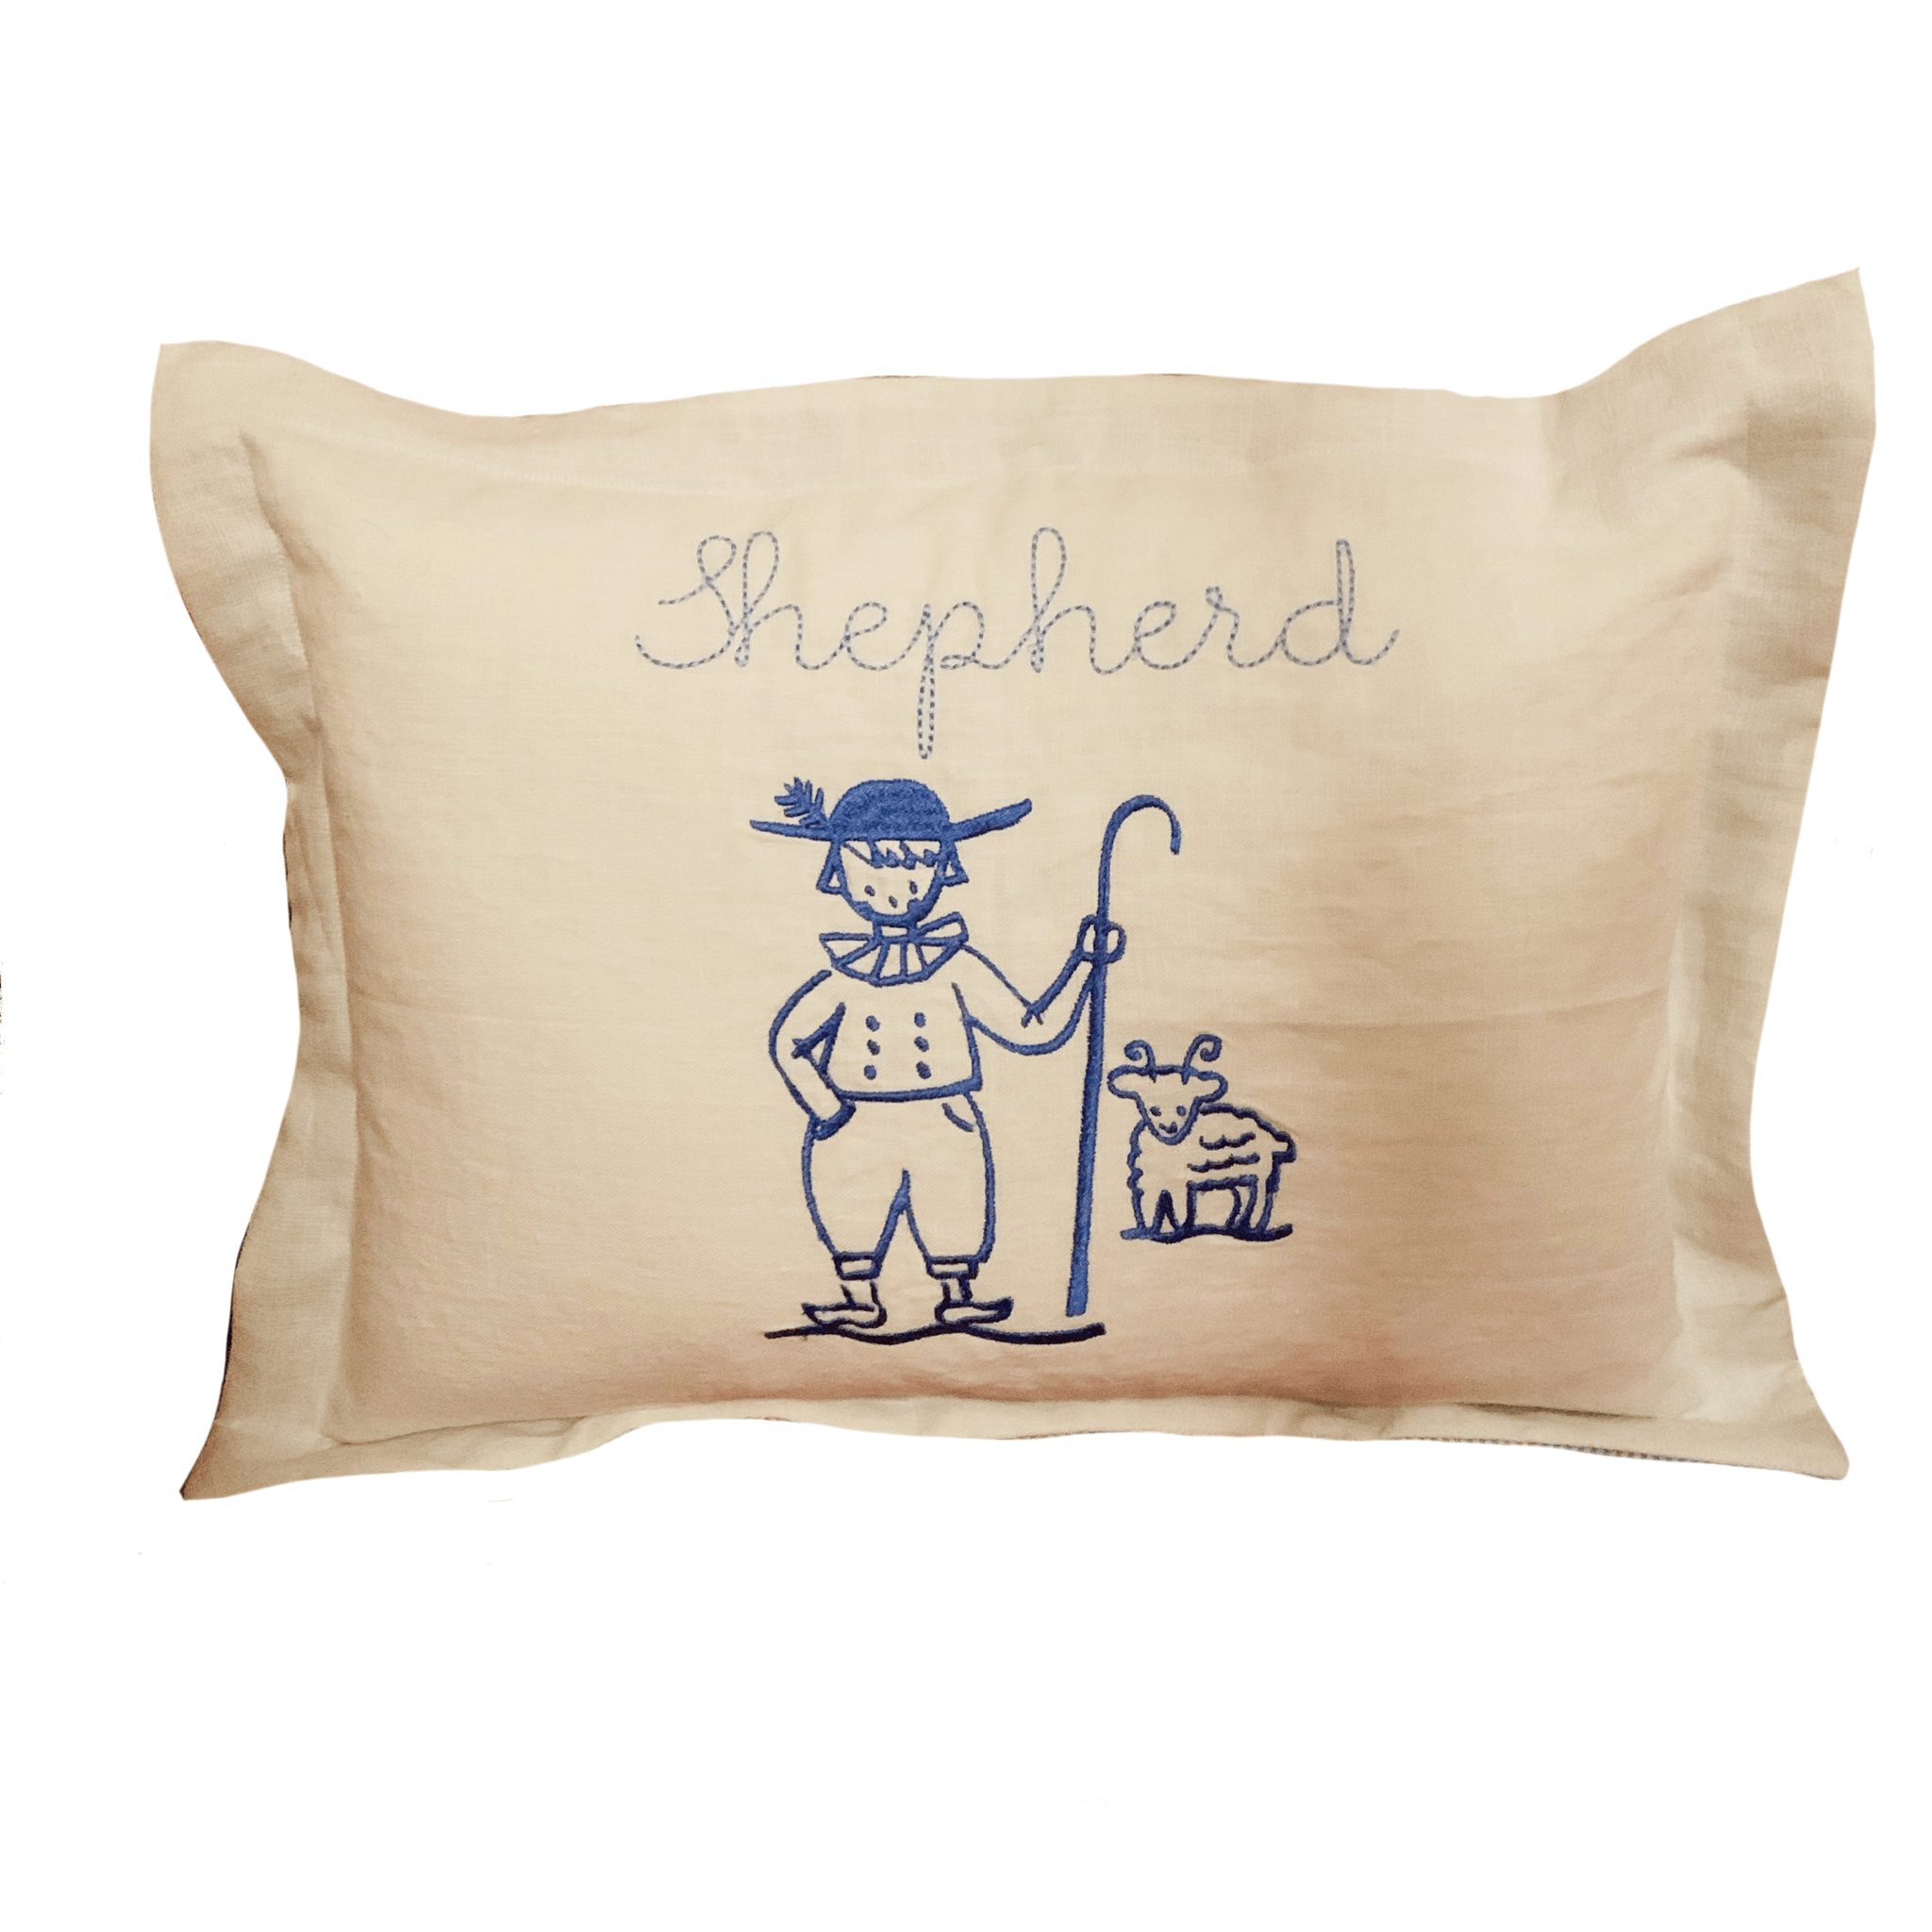 Embroidered Shepherd Pillow